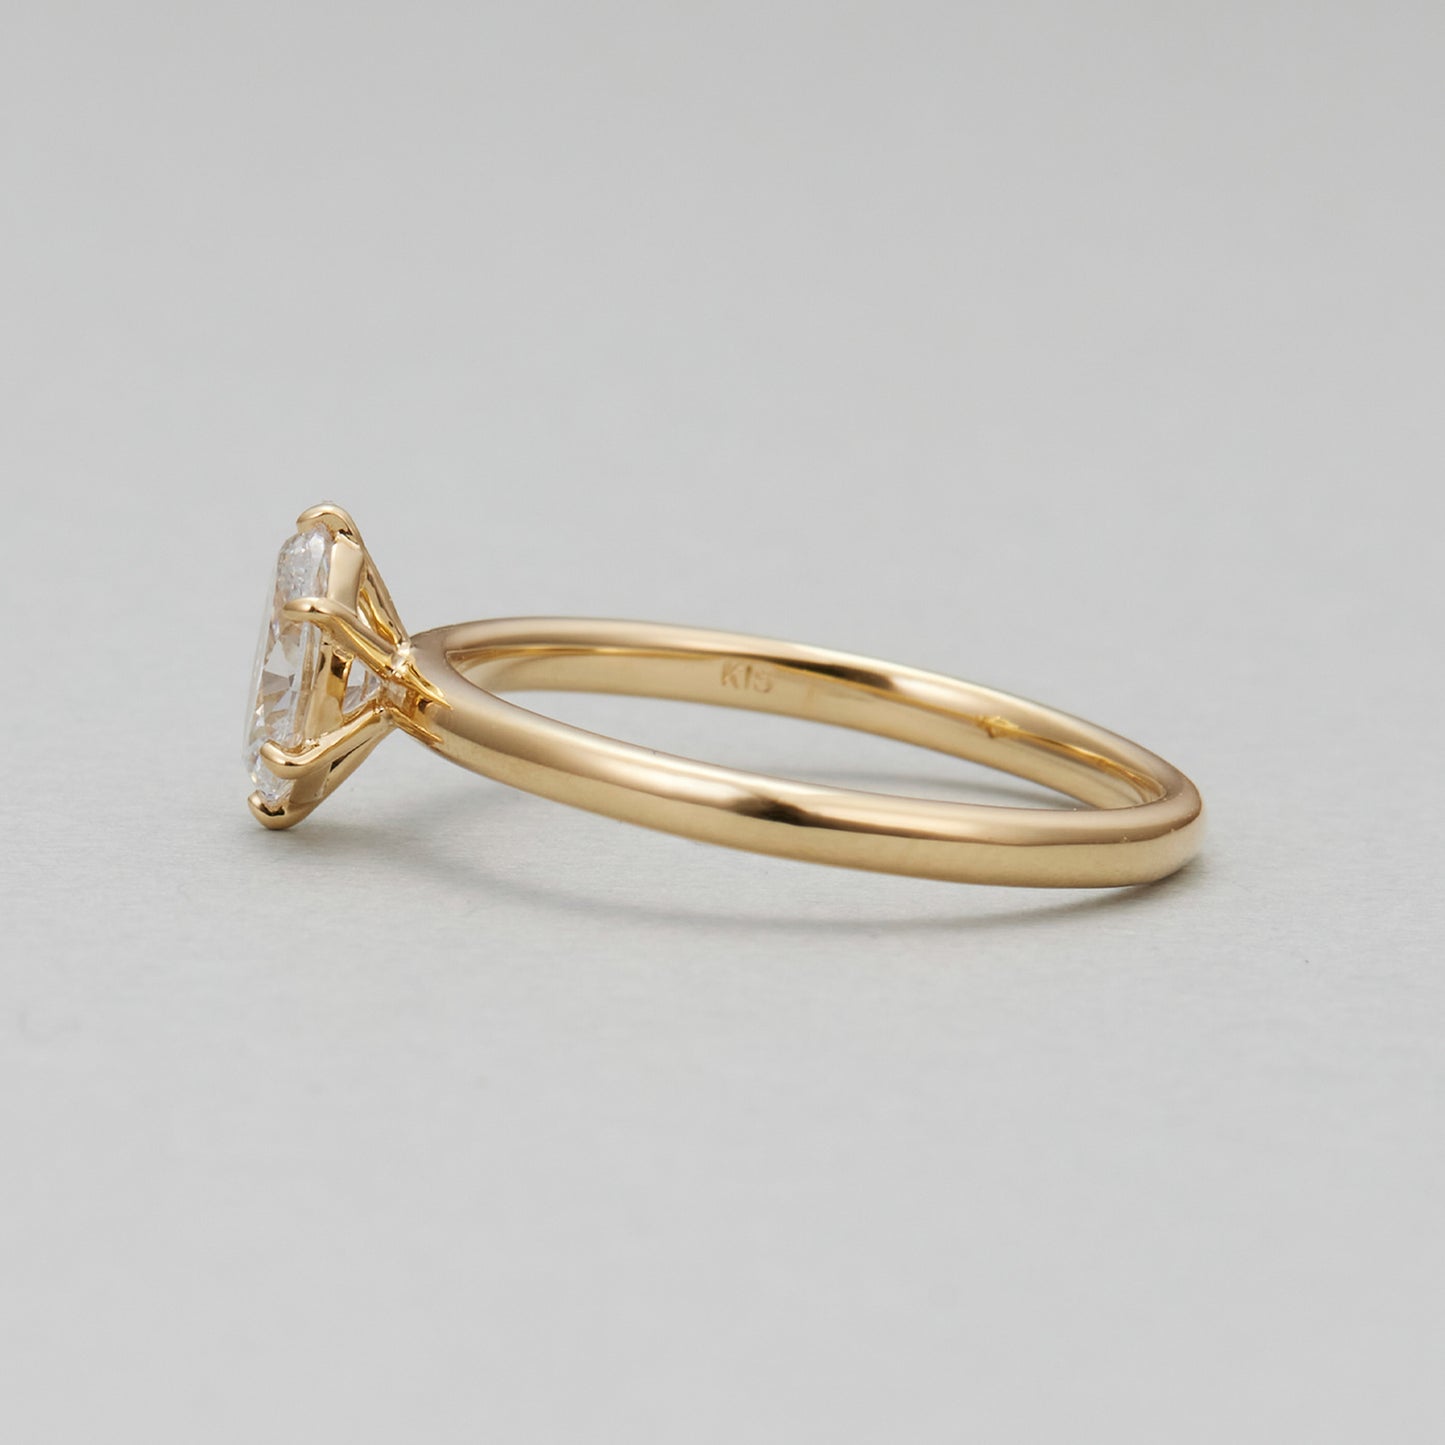 HA SIMPLY Oval Ring / K18 Yellow Gold / 0.5 ~ 0.6 Carat